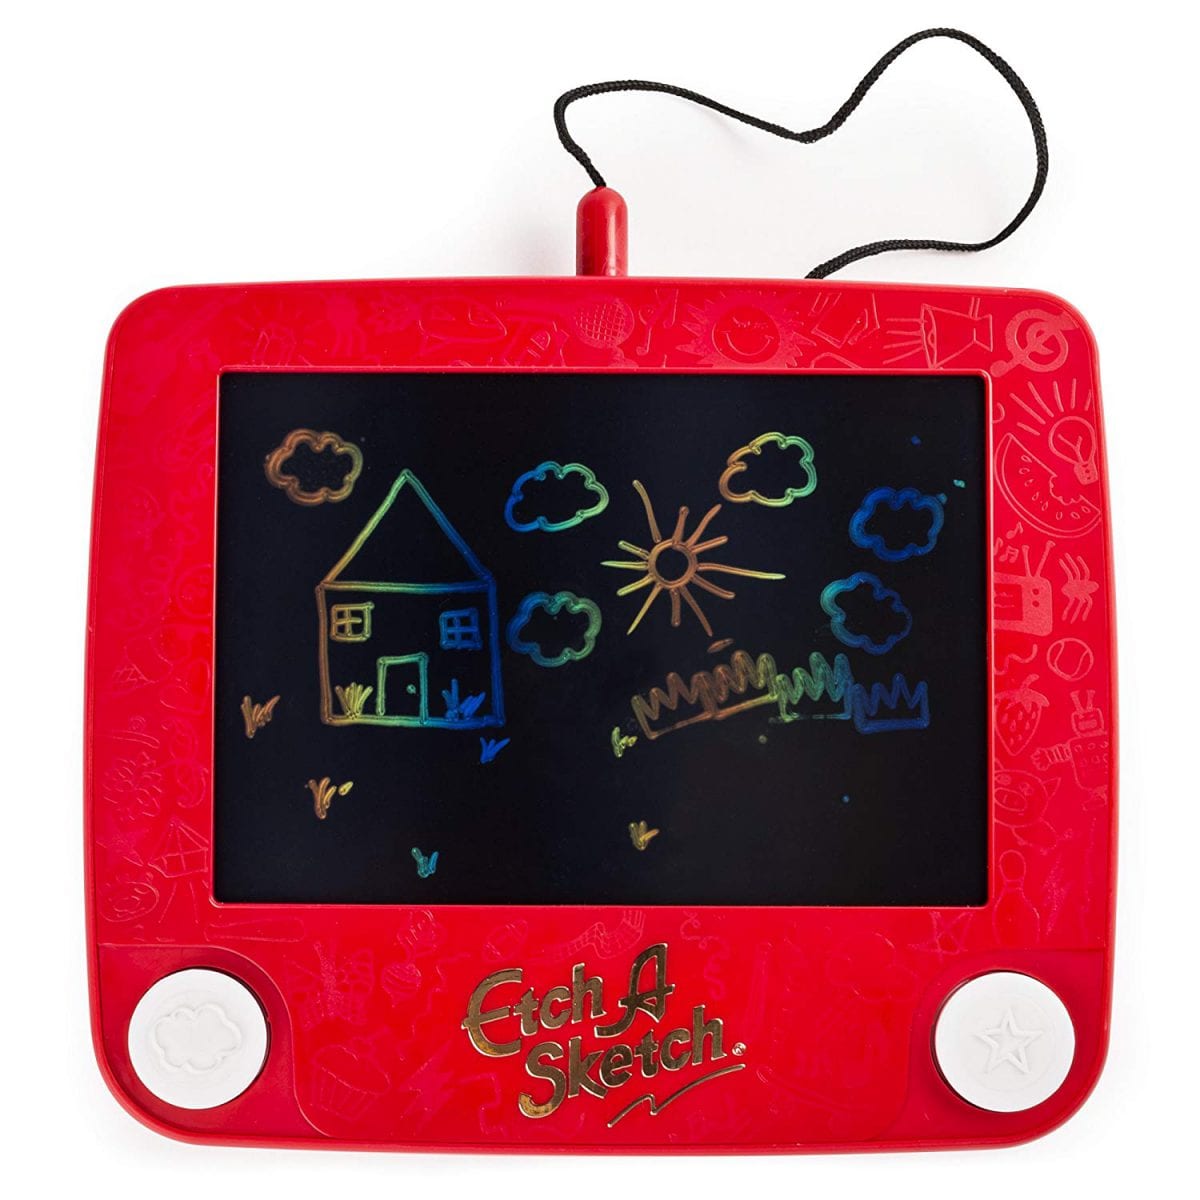 etch-a-sketch - toys to distract kids while eating out